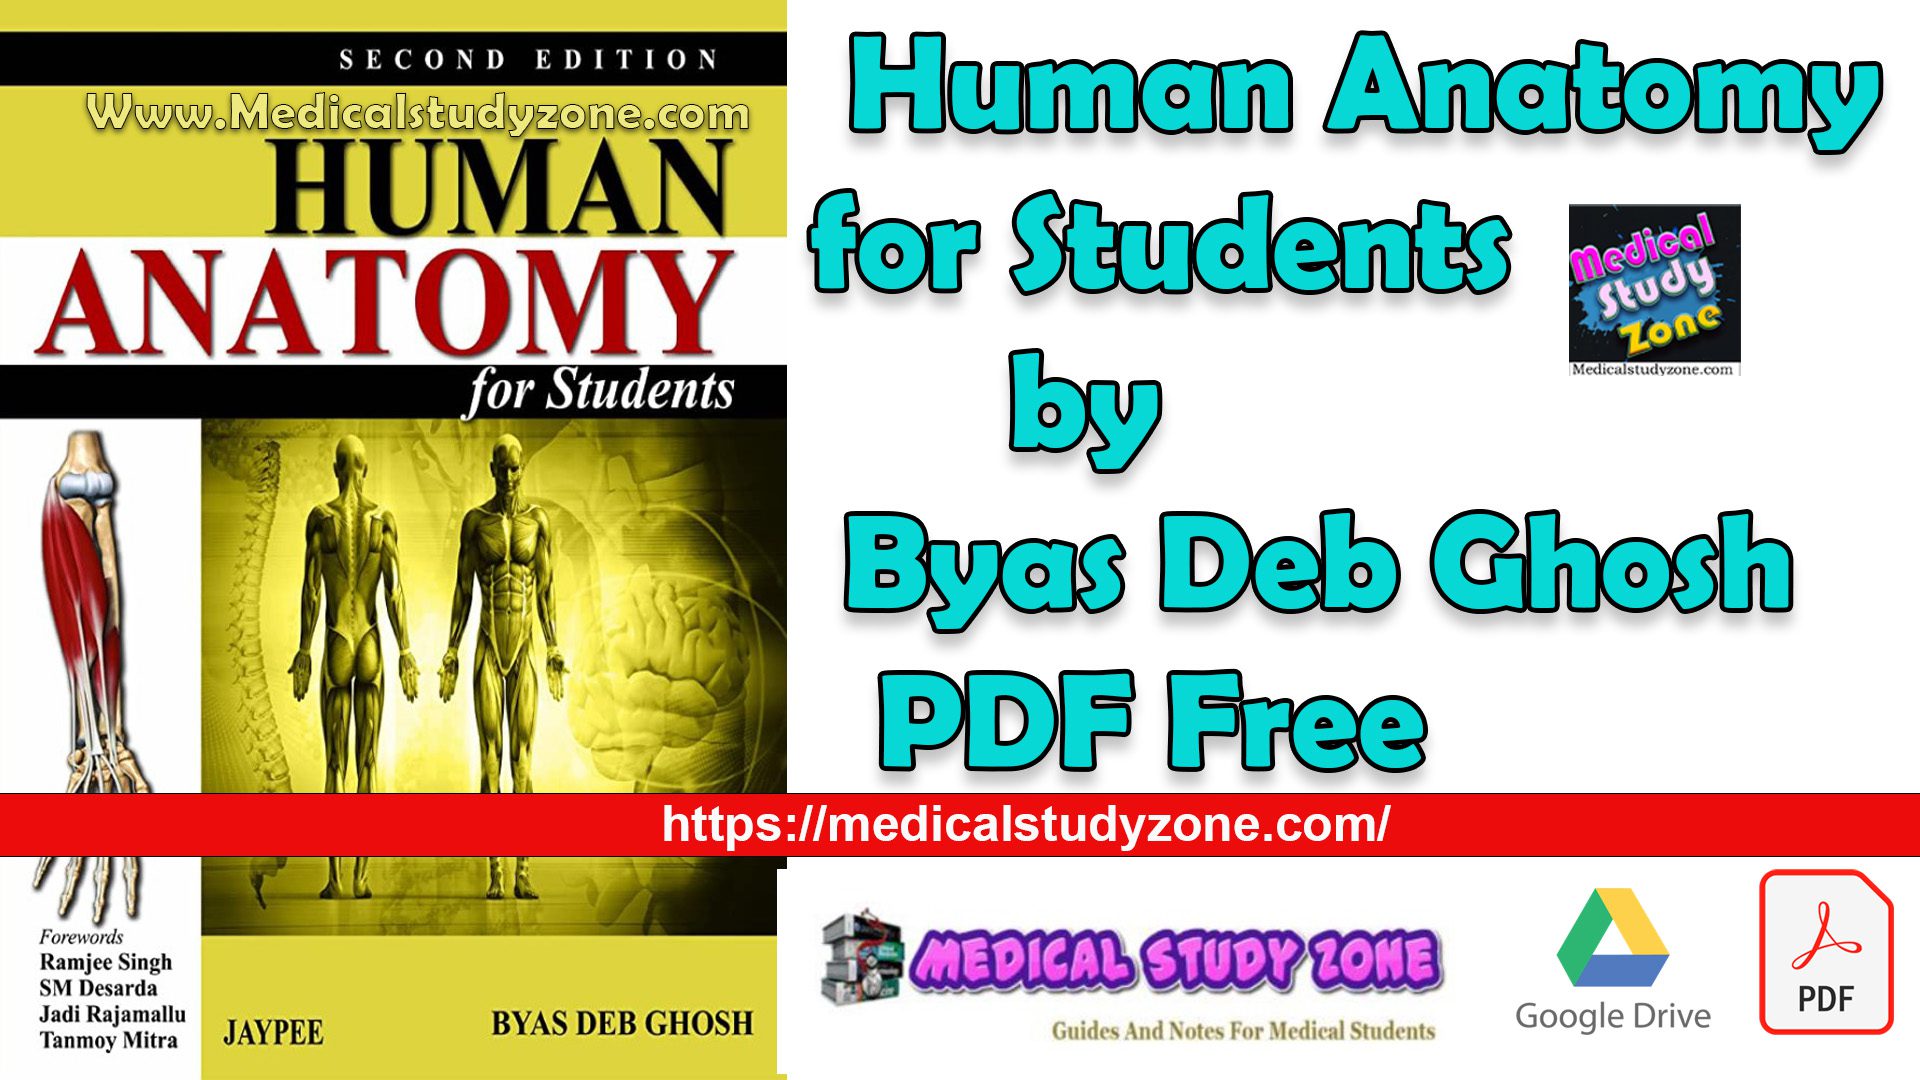 Download Human Anatomy for Students by Byas Deb Ghosh PDF Free